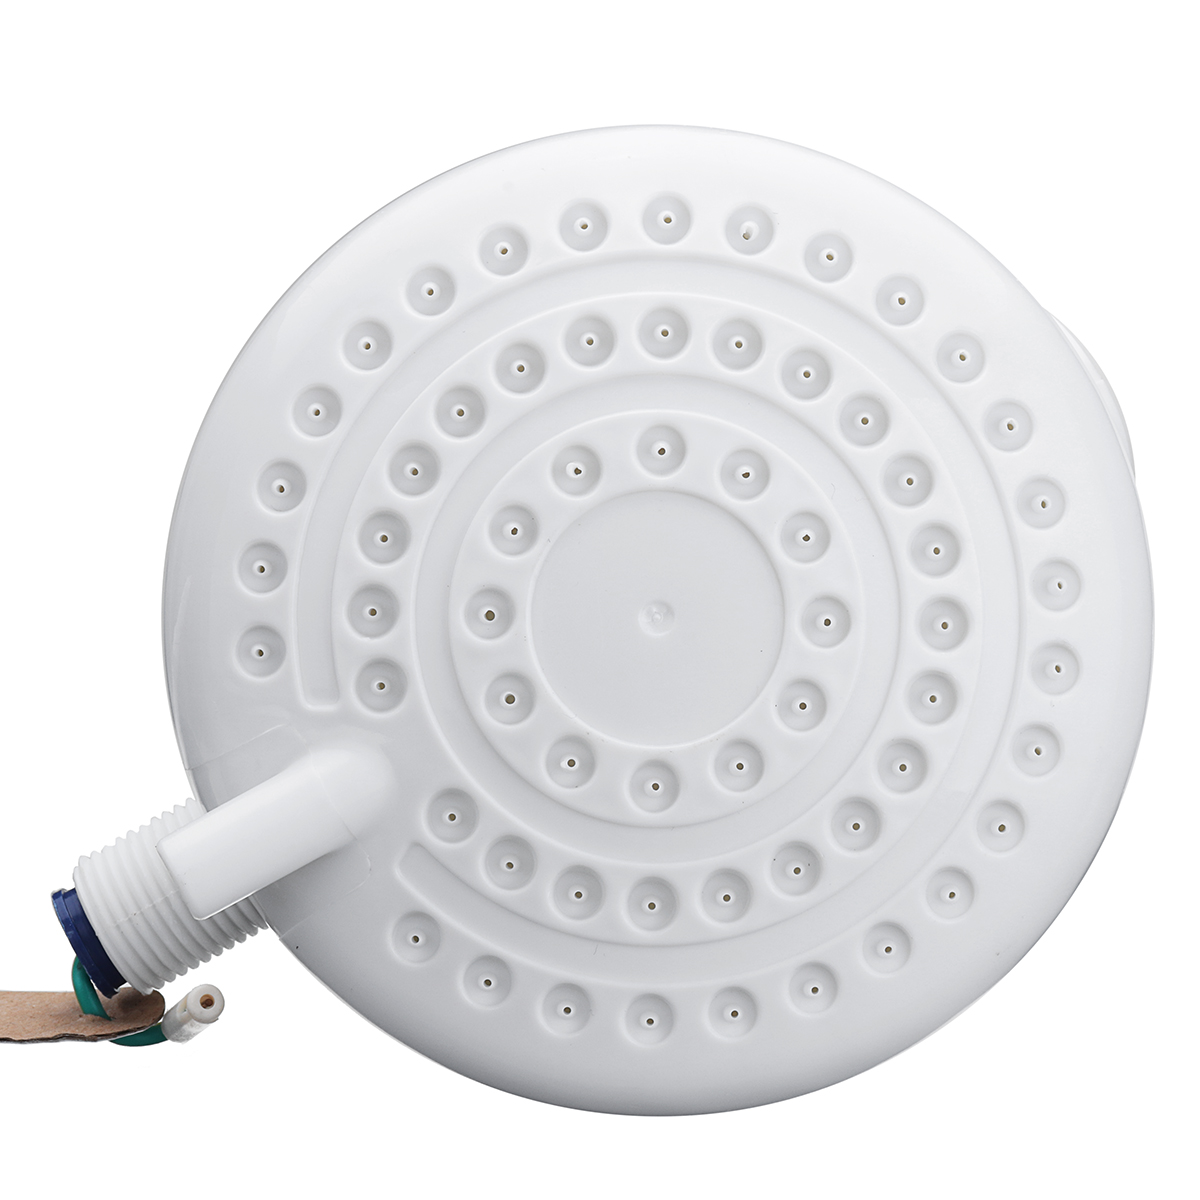 110V220V-5400W-Electric-Shower-Head-Instant-Hot-Water-Heater-Tankless-Adjustable-Temperature-1403487-5